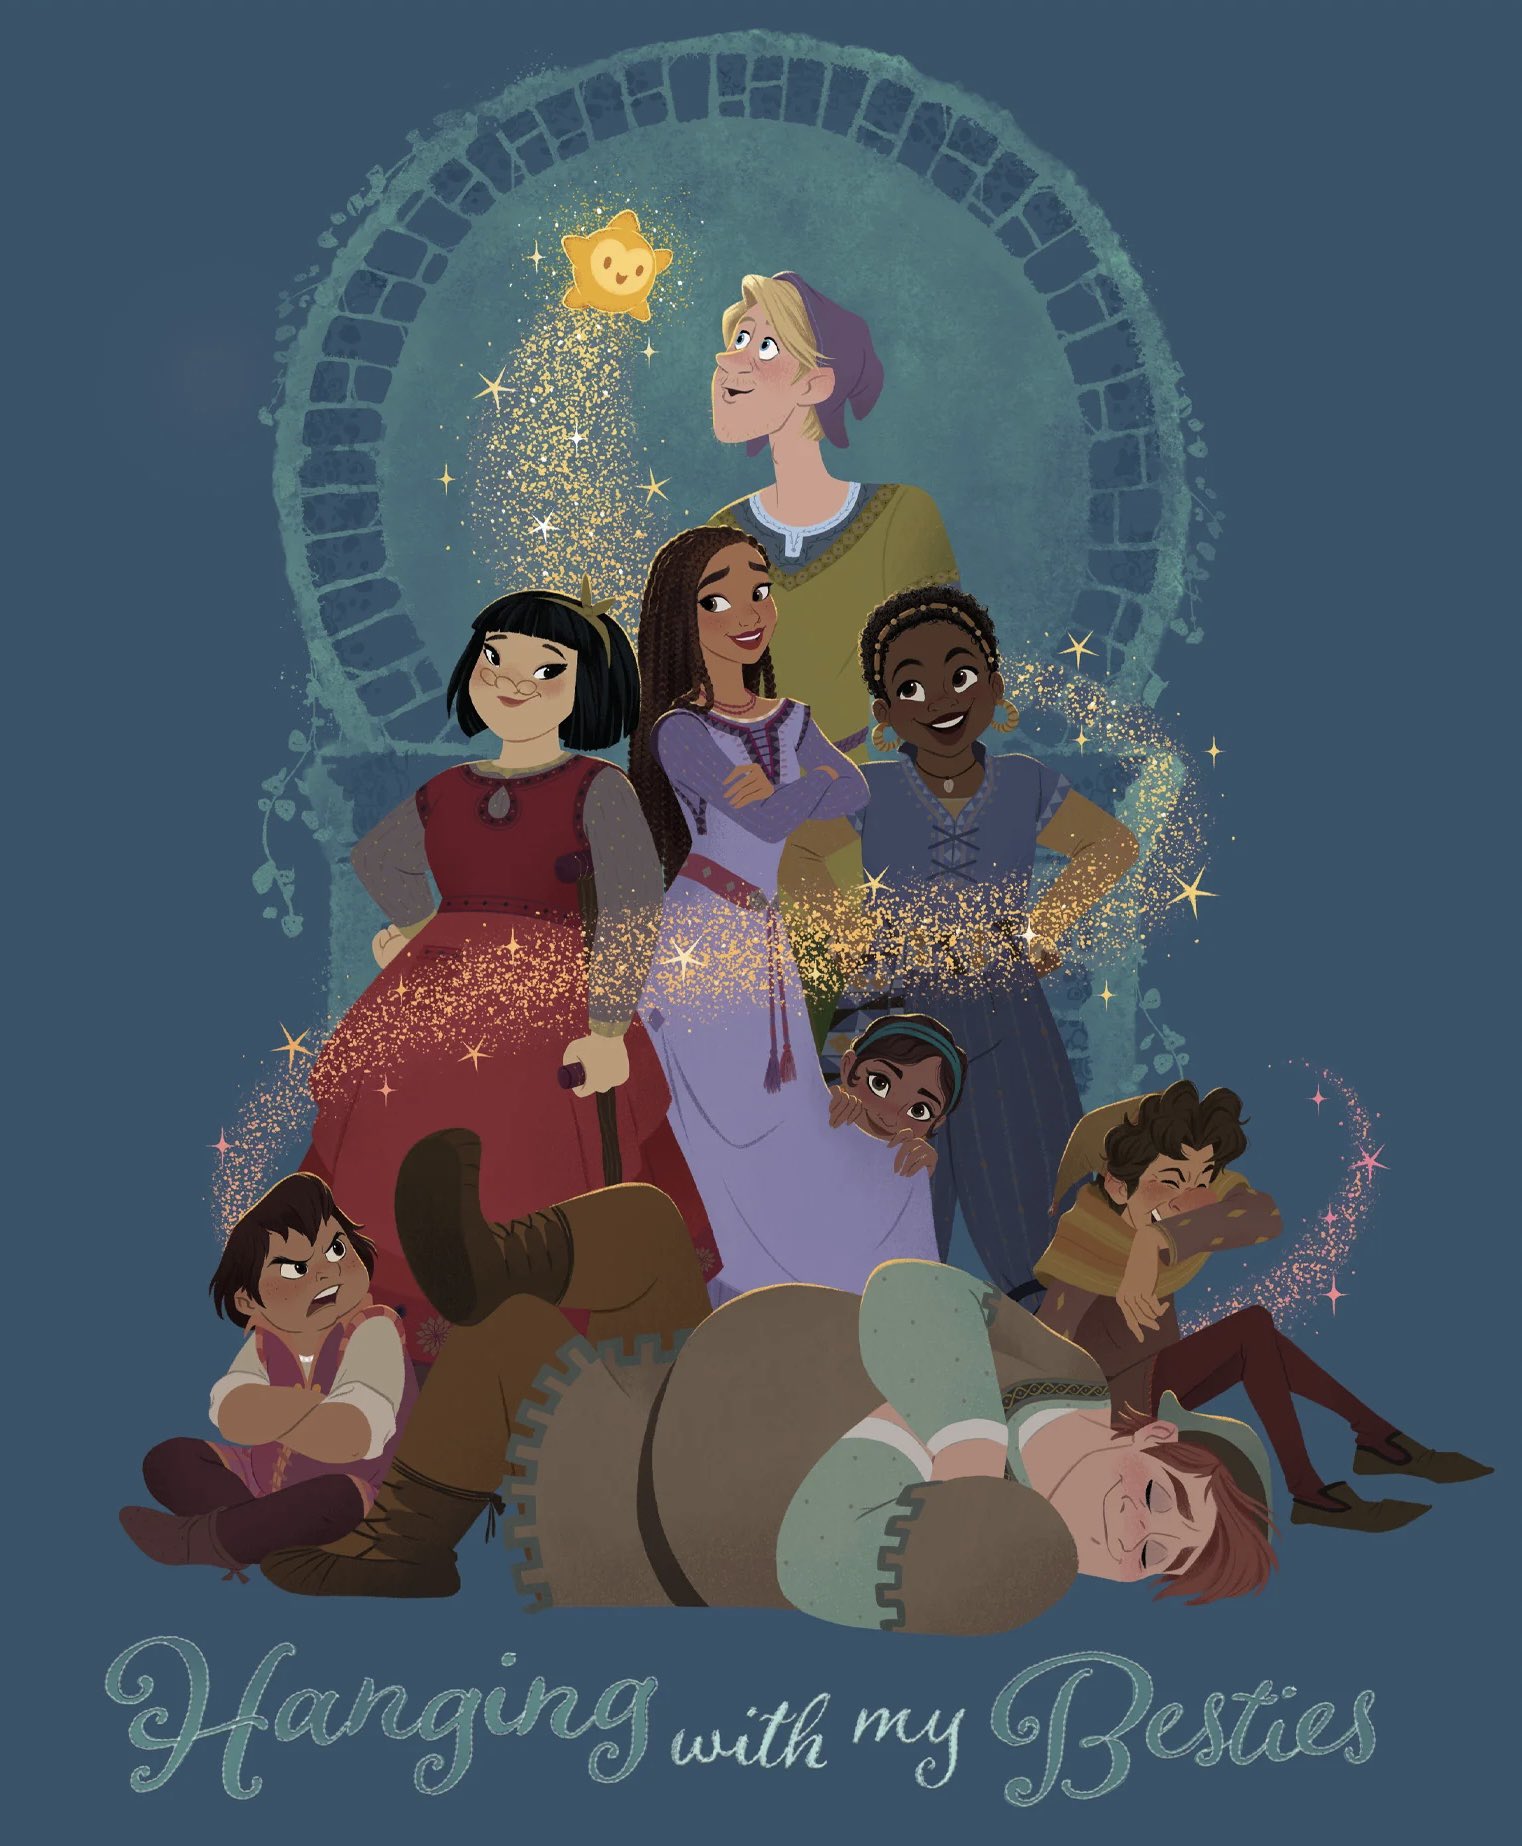 Disney Wish 2023 movie pictures collection - images, posters and official  art 